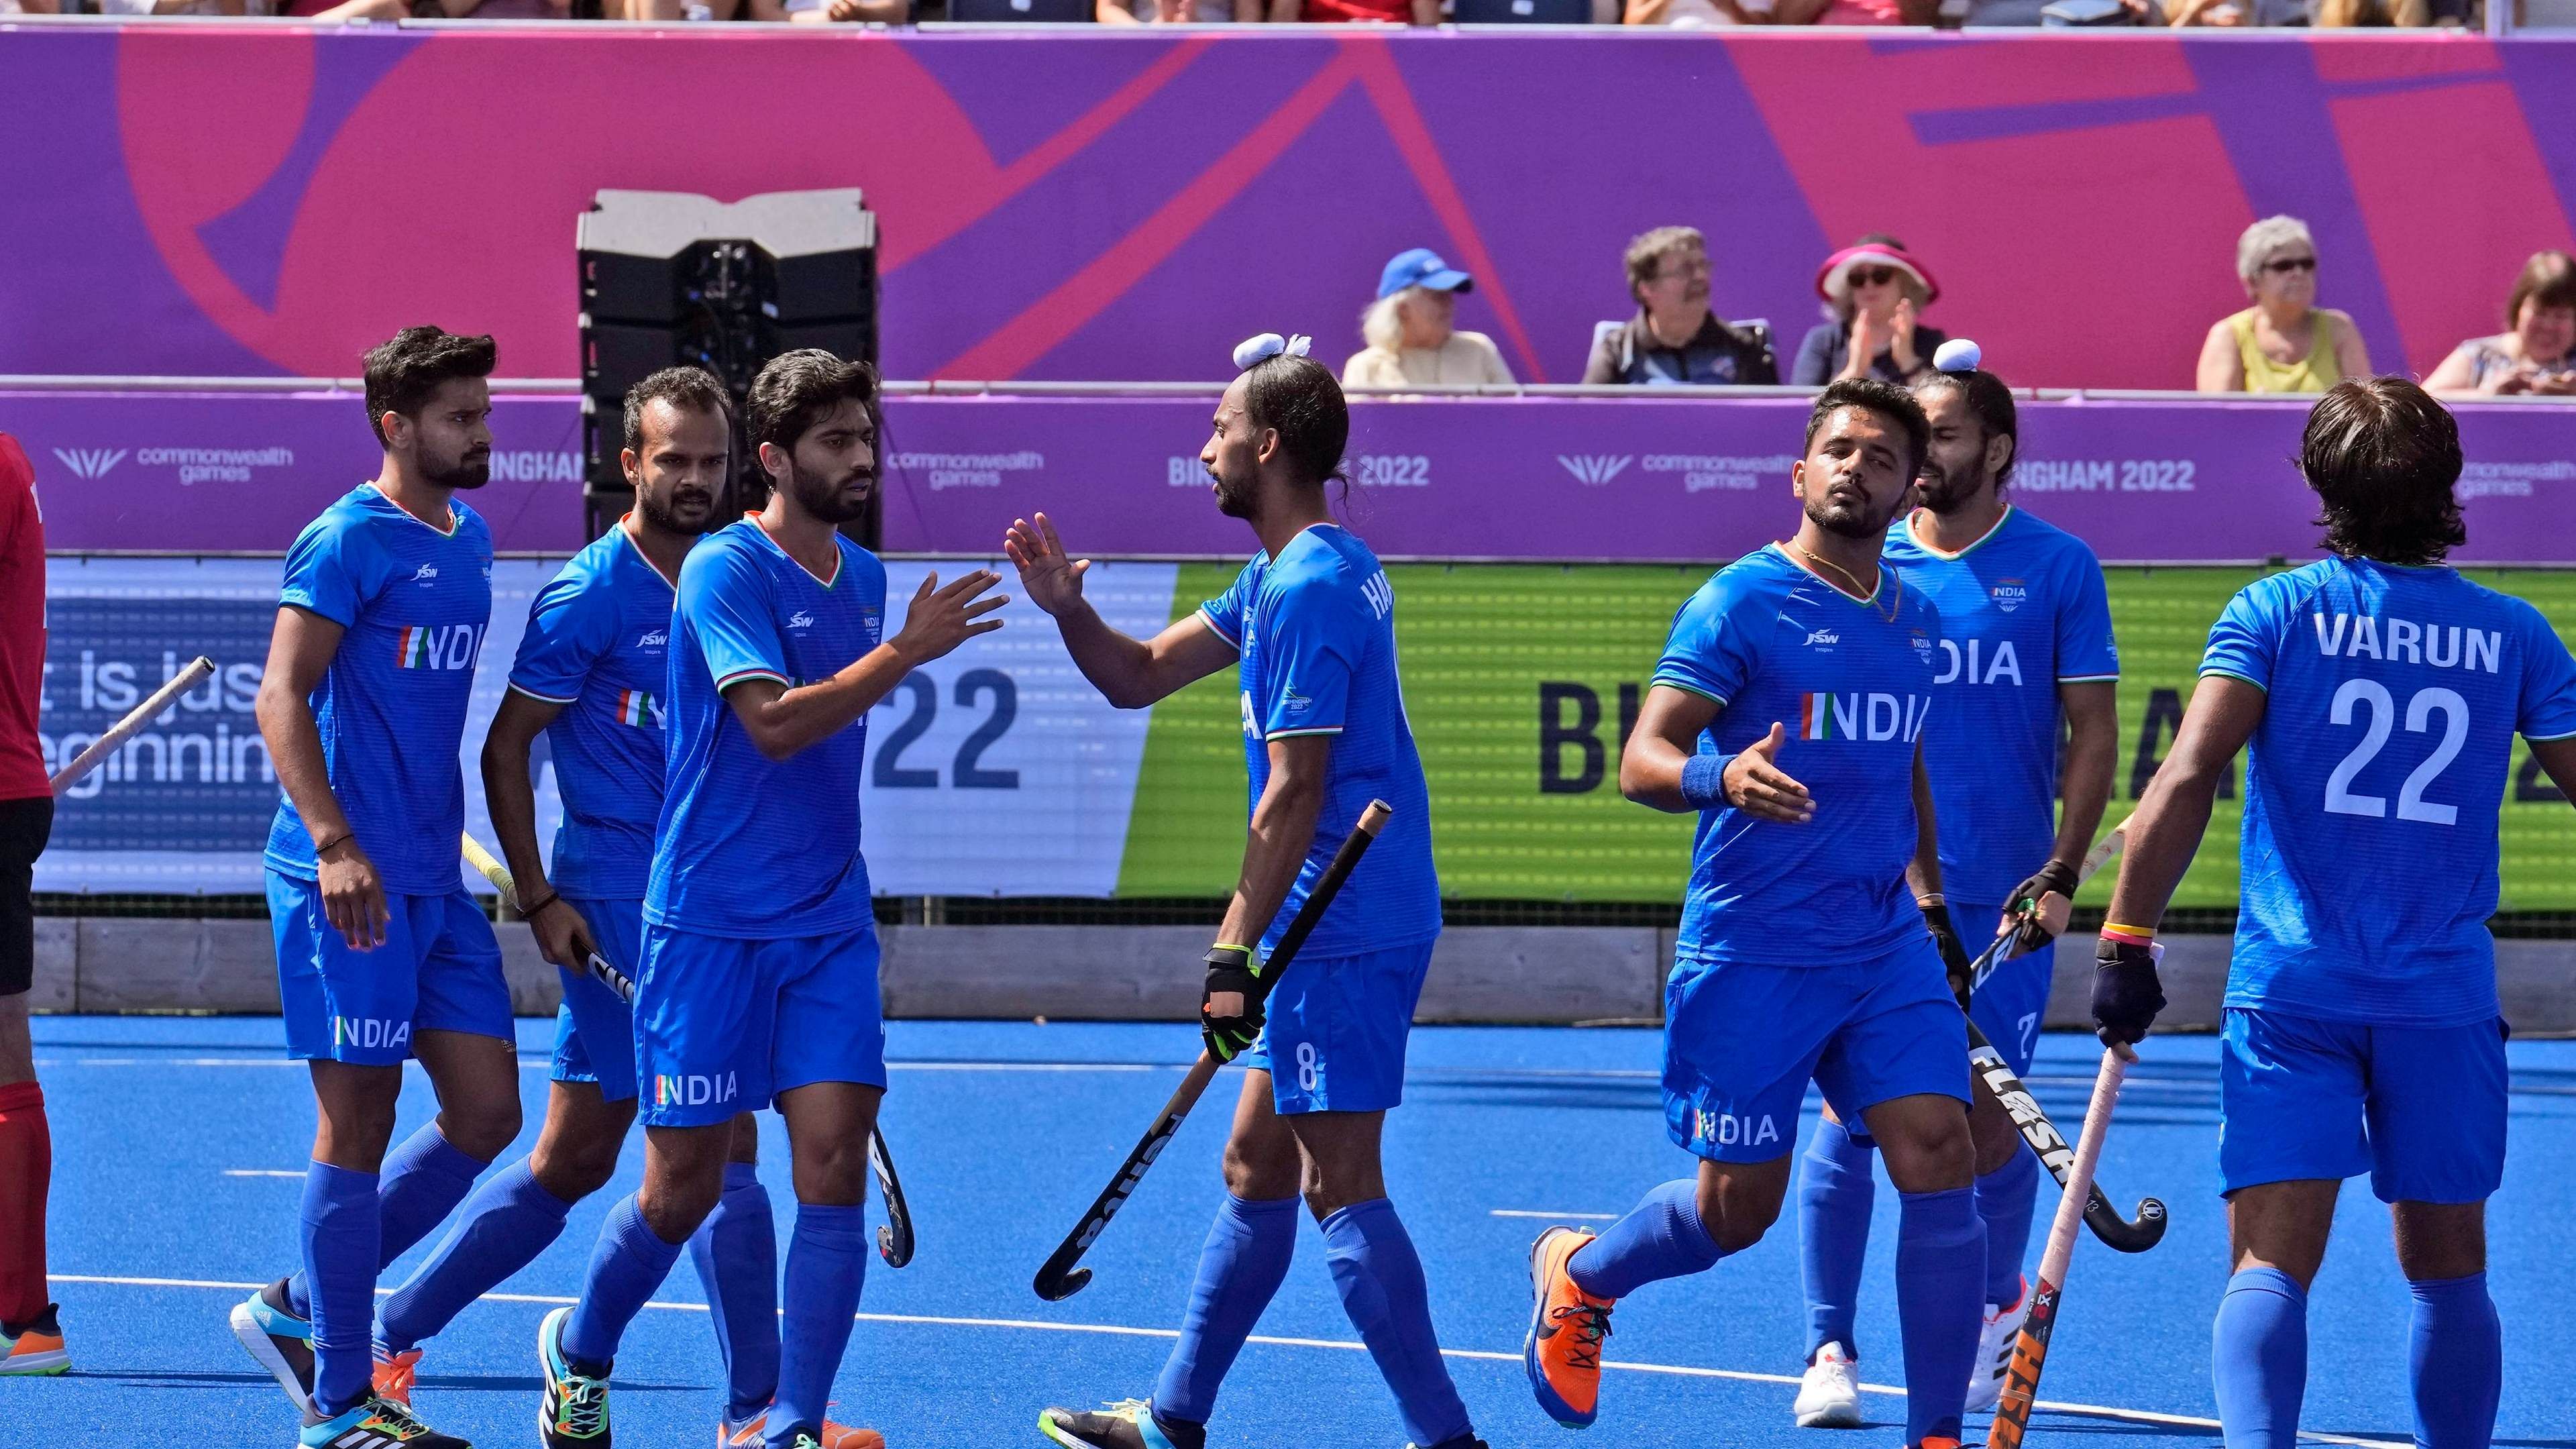 India conceded a last-minute goal to lose the opening Test 4-5. In the second game, they were leading through skipper Harmanpreet Singh's third-minute goal but were blown away in the final quarter to go down 4-7. Credit: AP Photo